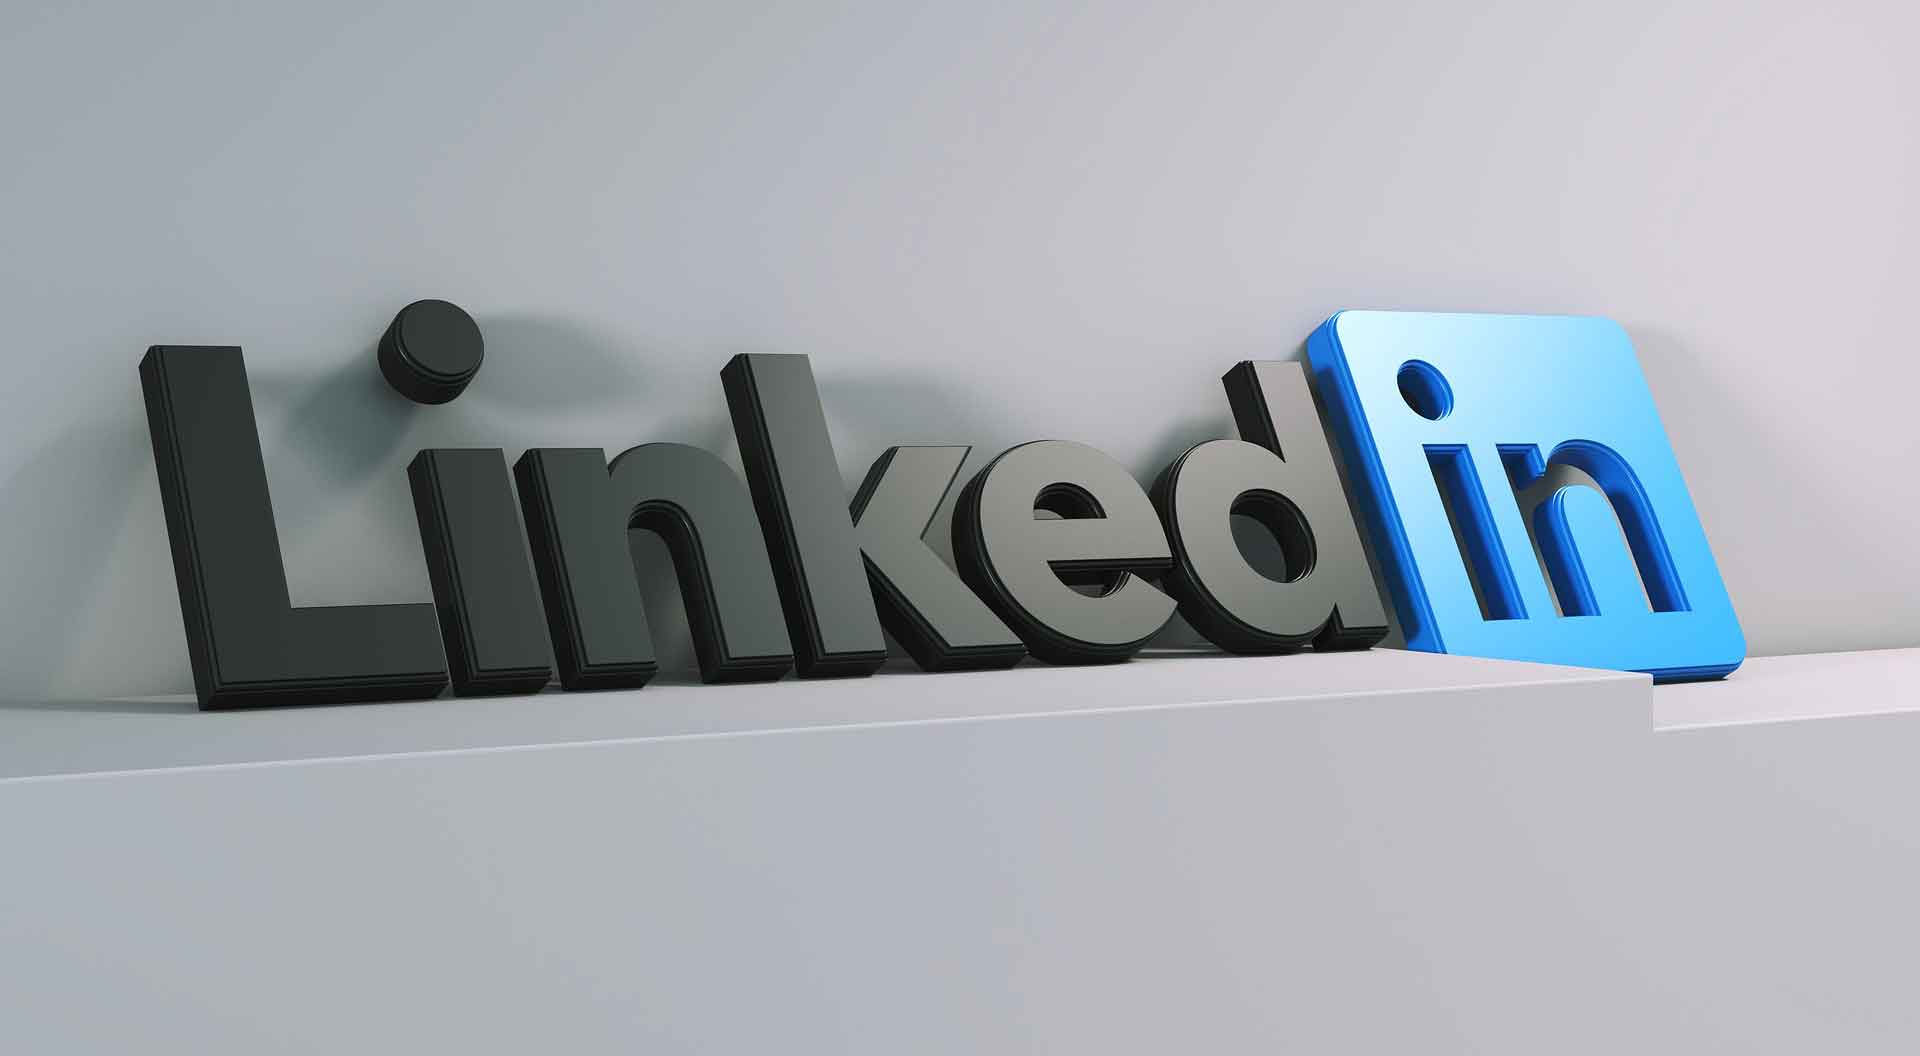 If you haven’t started sharing LinkedIn content yet, it’s high time you get on board.